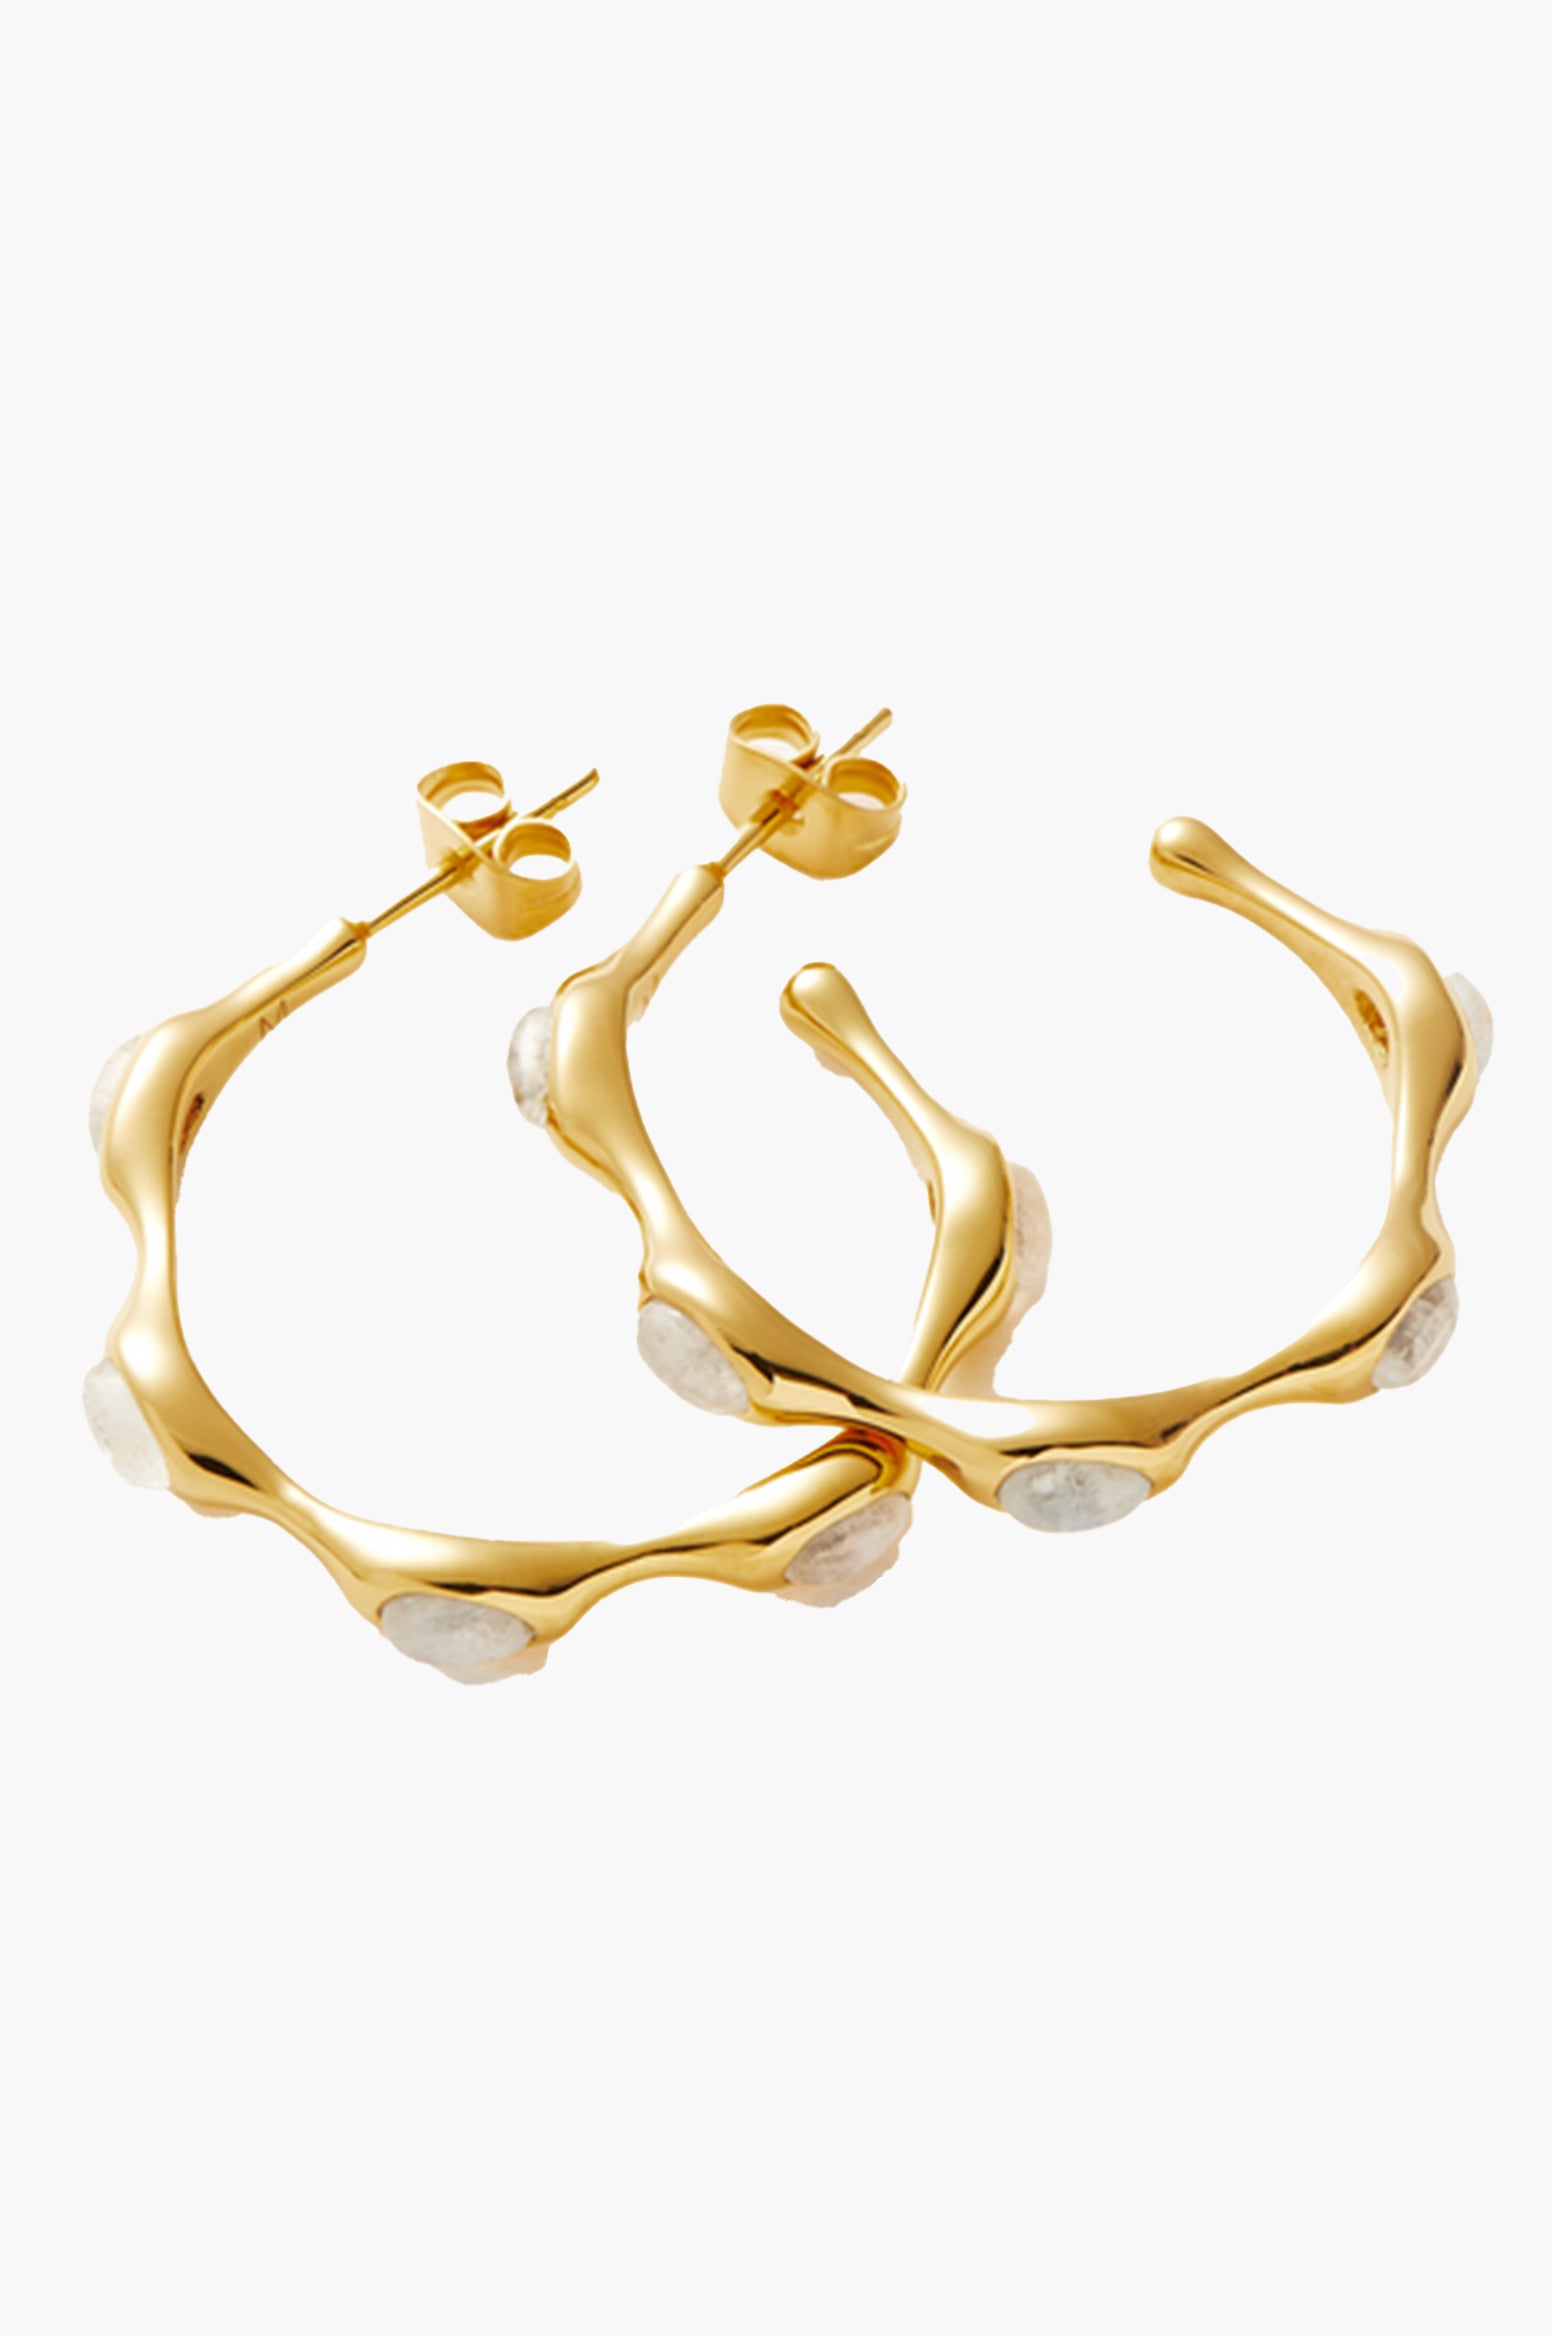 The MISSOMA Magma Gemstone Small Hoop Earrings in Gold available at The New Trend.